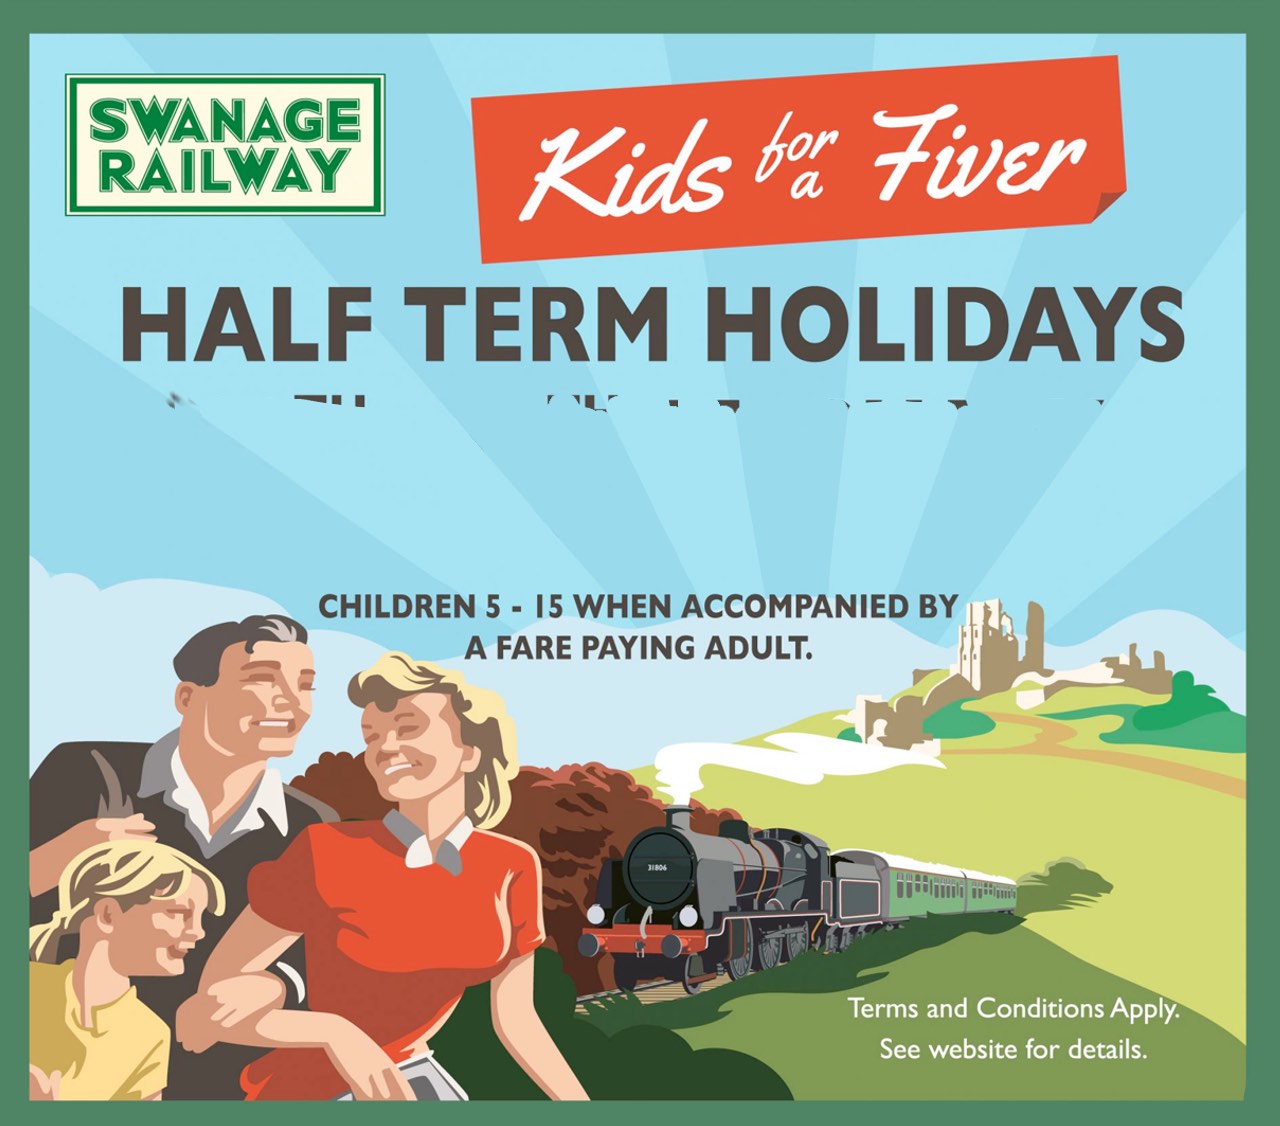 Kids for a Fiver on Swanage Railway